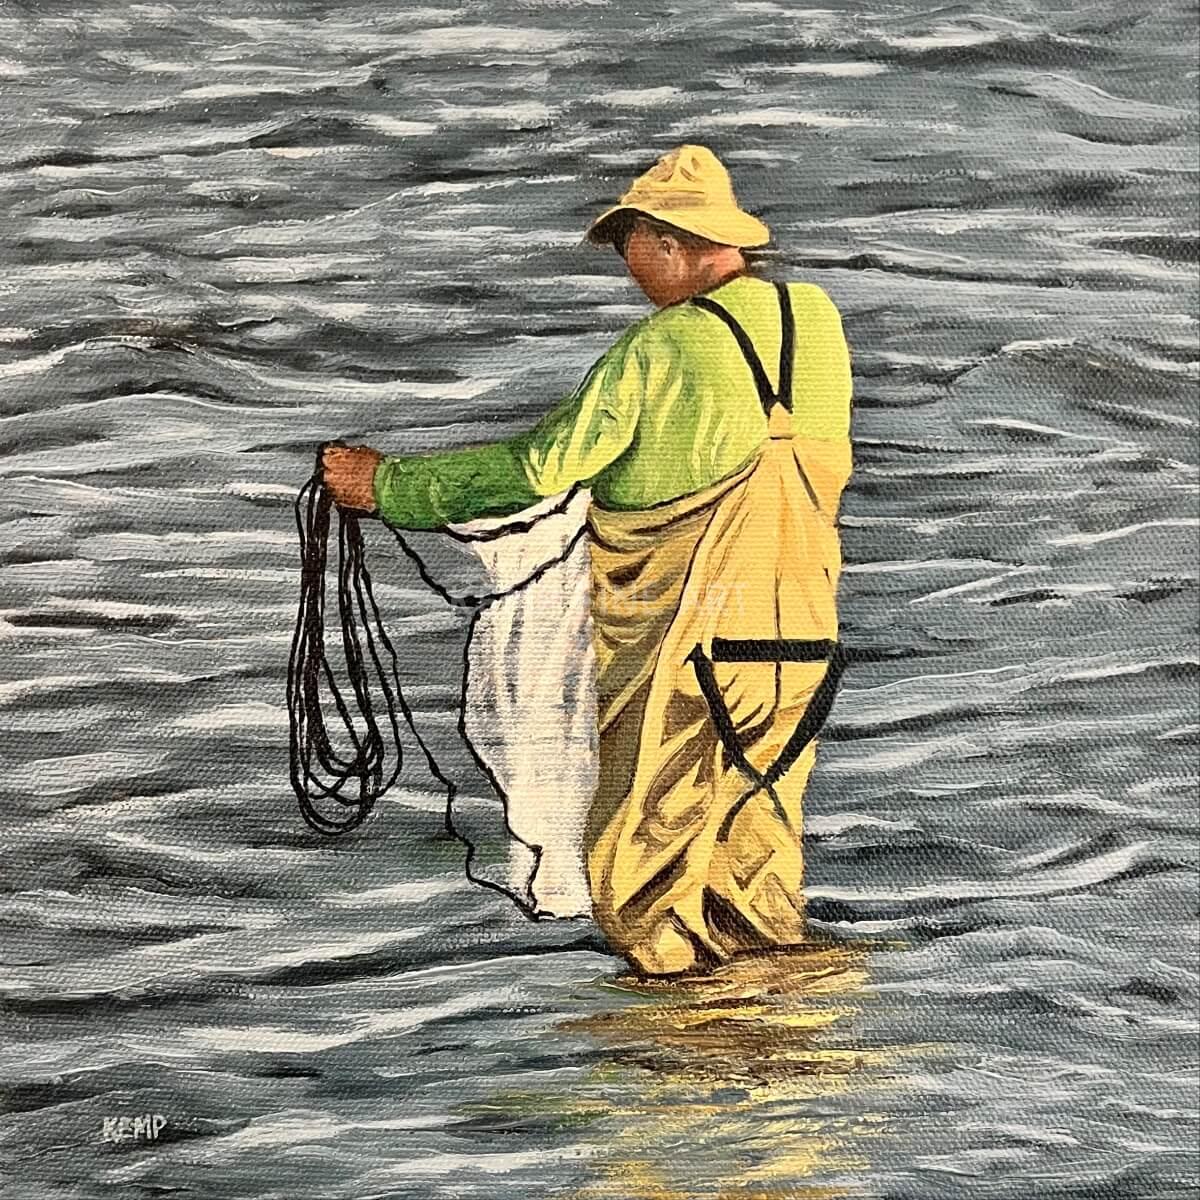 Gathering The Net | Oil on Canvas - by Jim Kemp